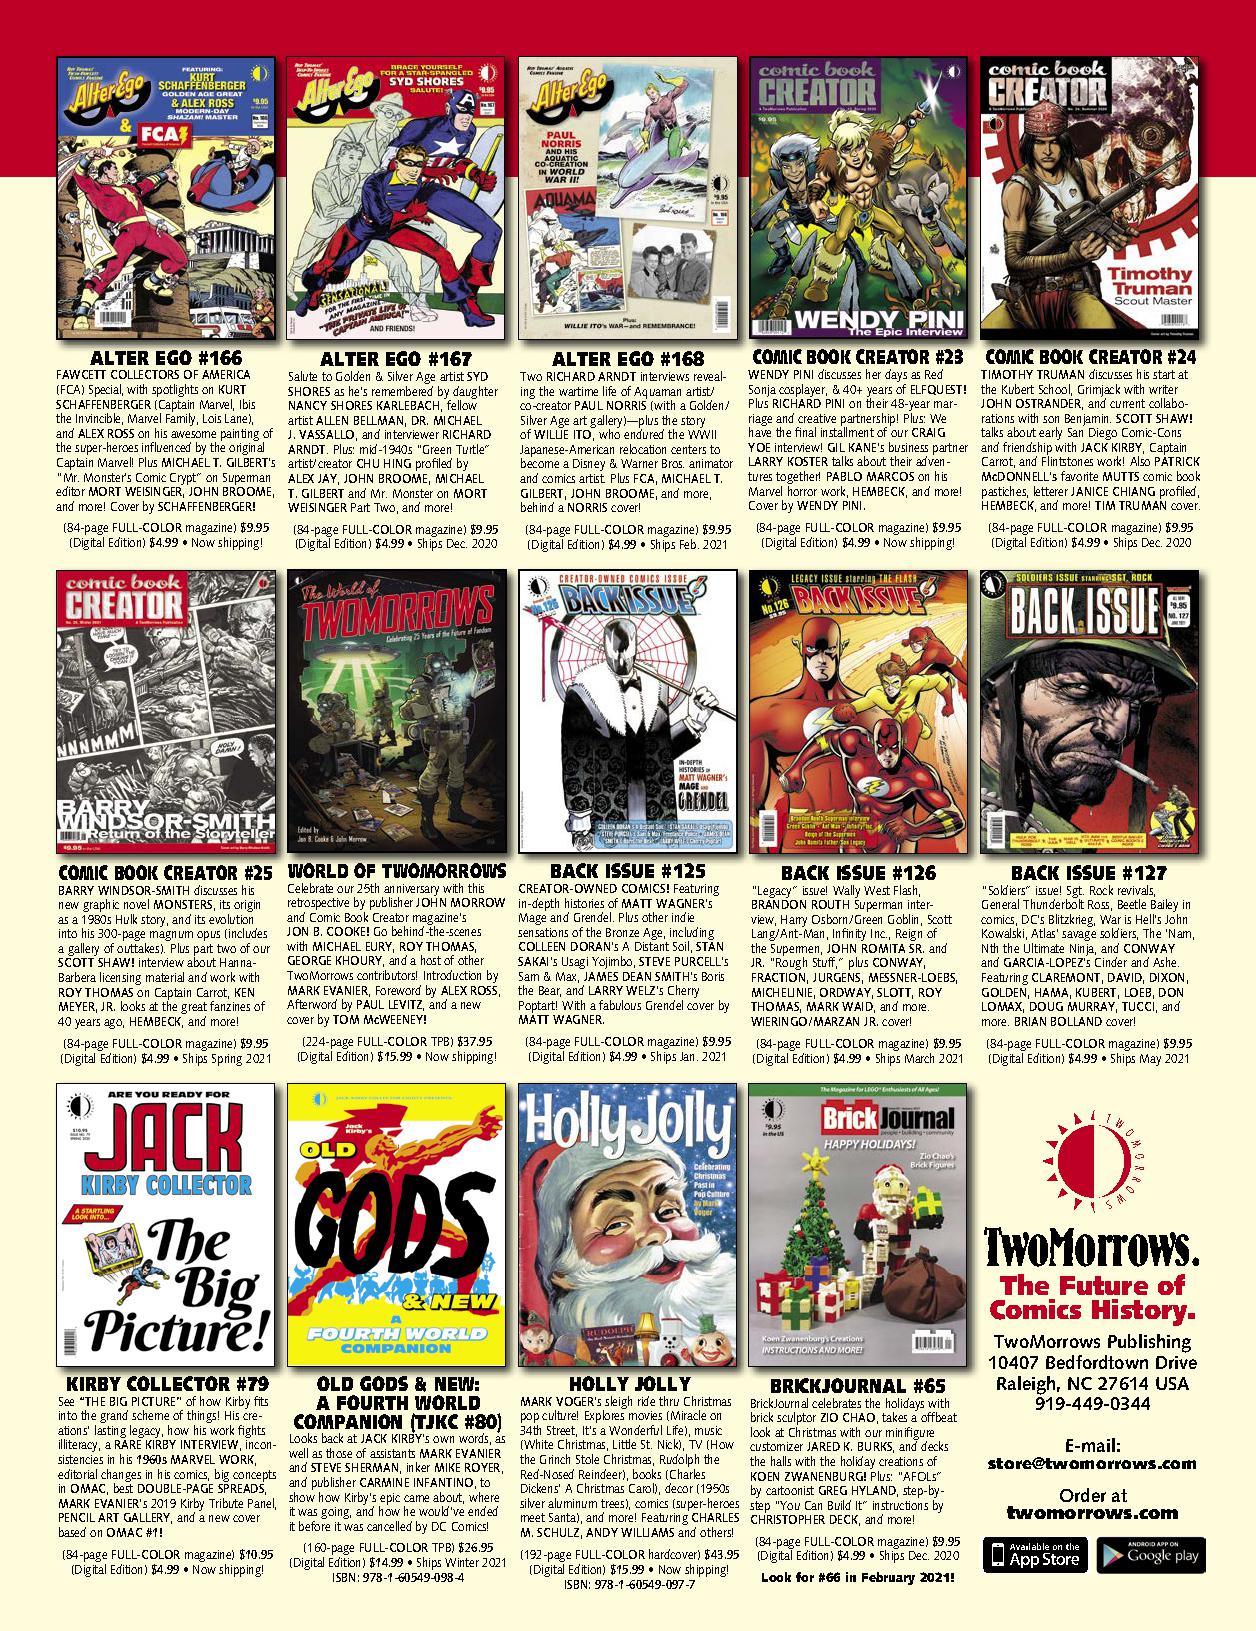 Read online Back Issue comic -  Issue #124 - 83